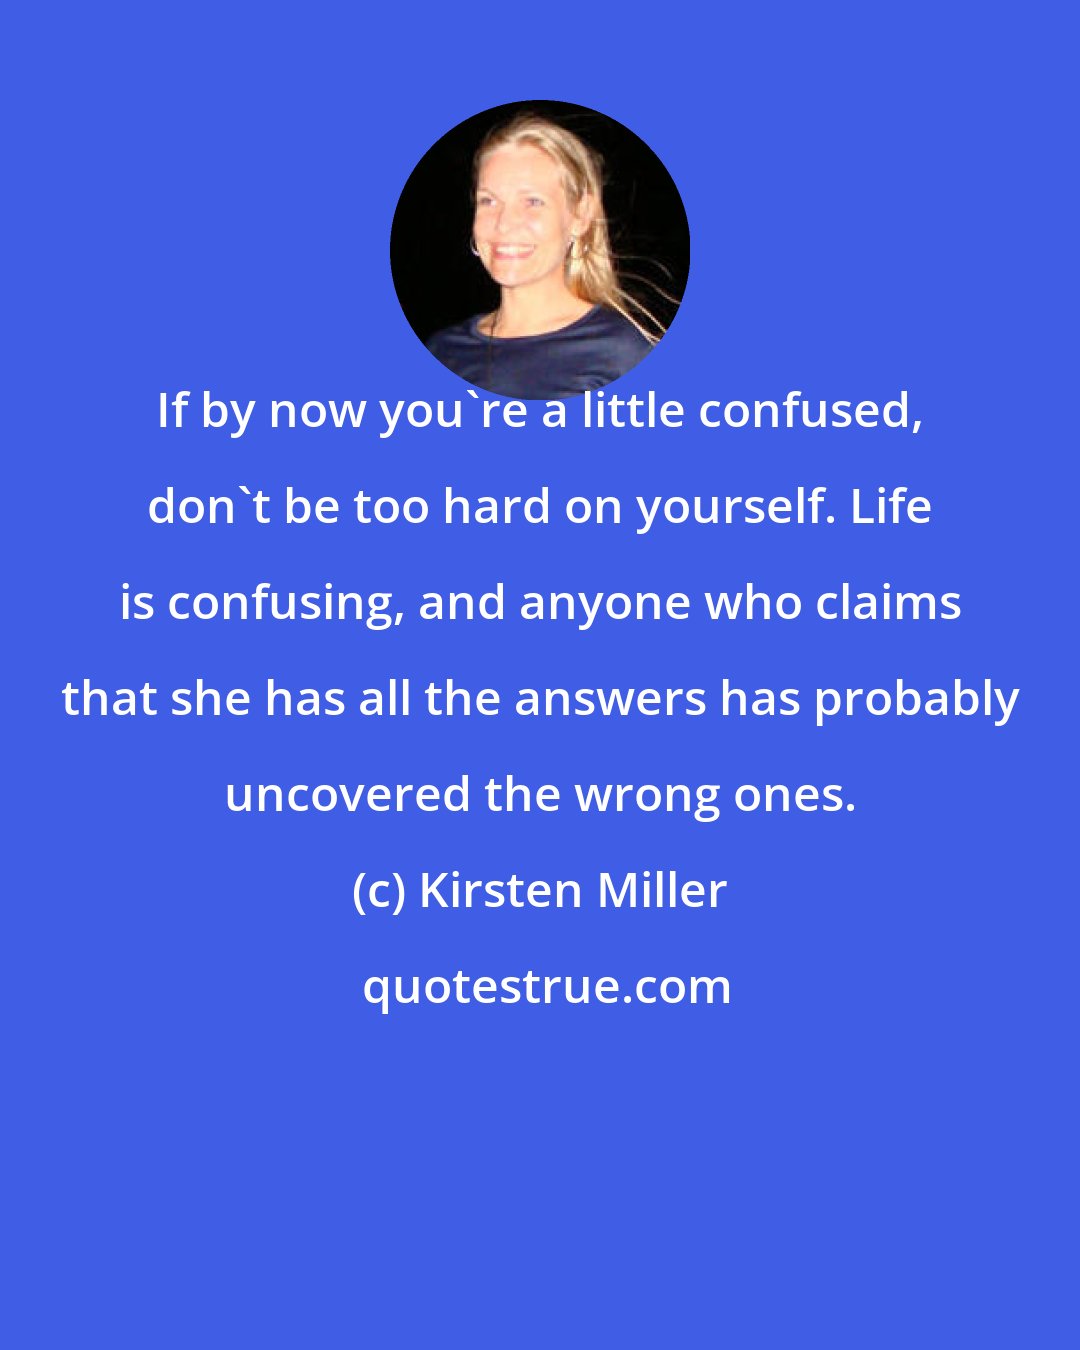 Kirsten Miller: If by now you're a little confused, don't be too hard on yourself. Life is confusing, and anyone who claims that she has all the answers has probably uncovered the wrong ones.